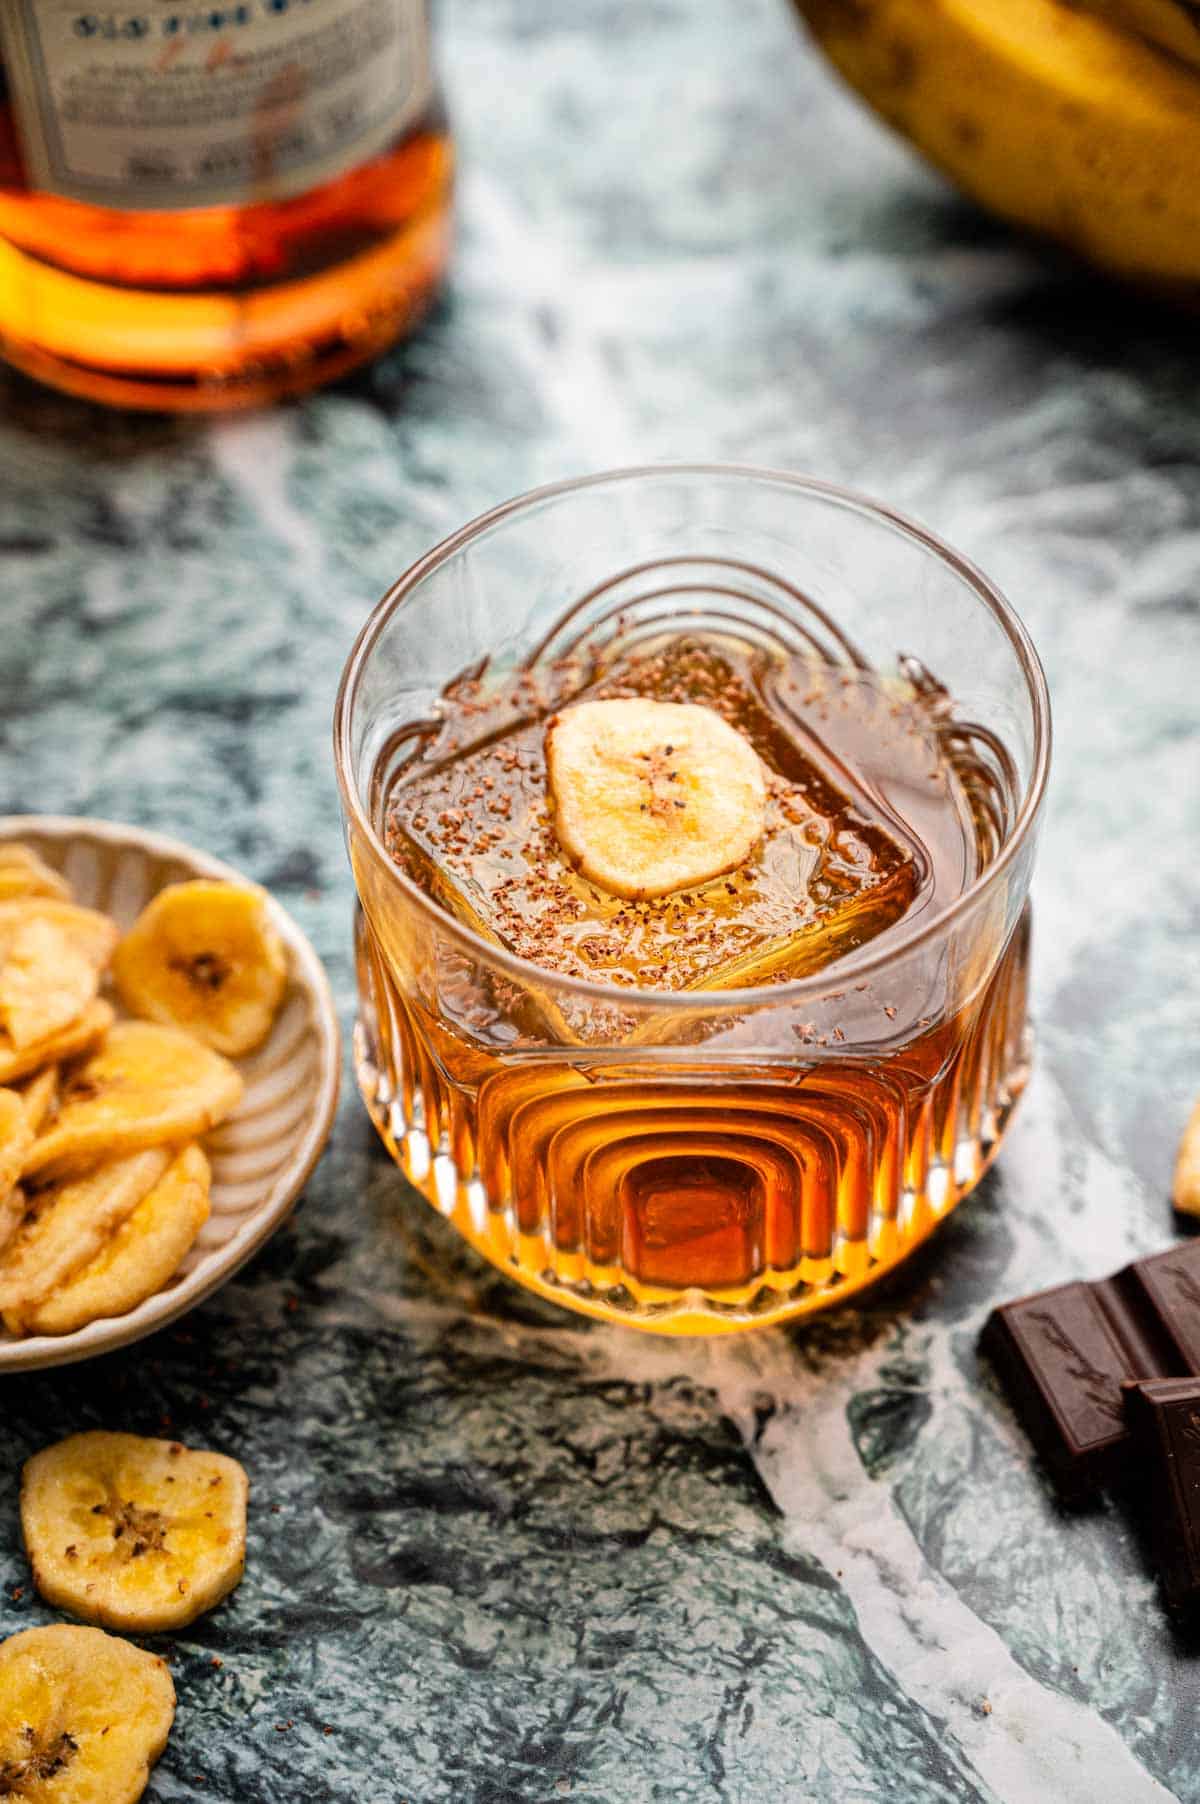 A rocks glass with a banana old fashioned garnished with chocolate shavings and a banana chip, sitting on a green marble table.